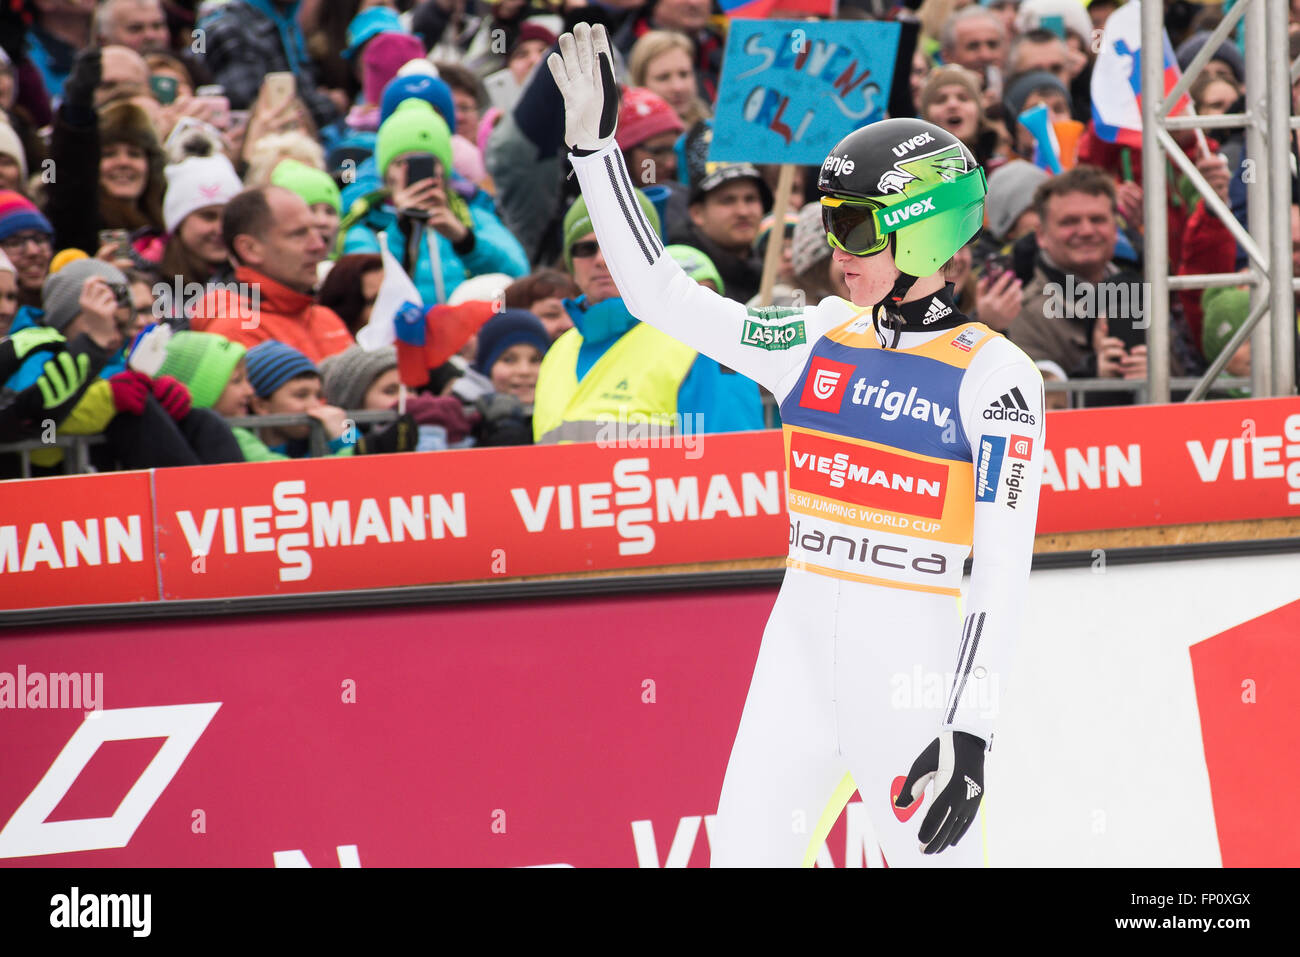 Planica, Slovenia. 17th Mar, 2016. Peter Prevc of Slovenia competes during Planica FIS Ski Jumping World Cup final on the March 17, 2016 in Planica, Slovenia. © Rok Rakun/Pacific Press/Alamy Live News Stock Photo